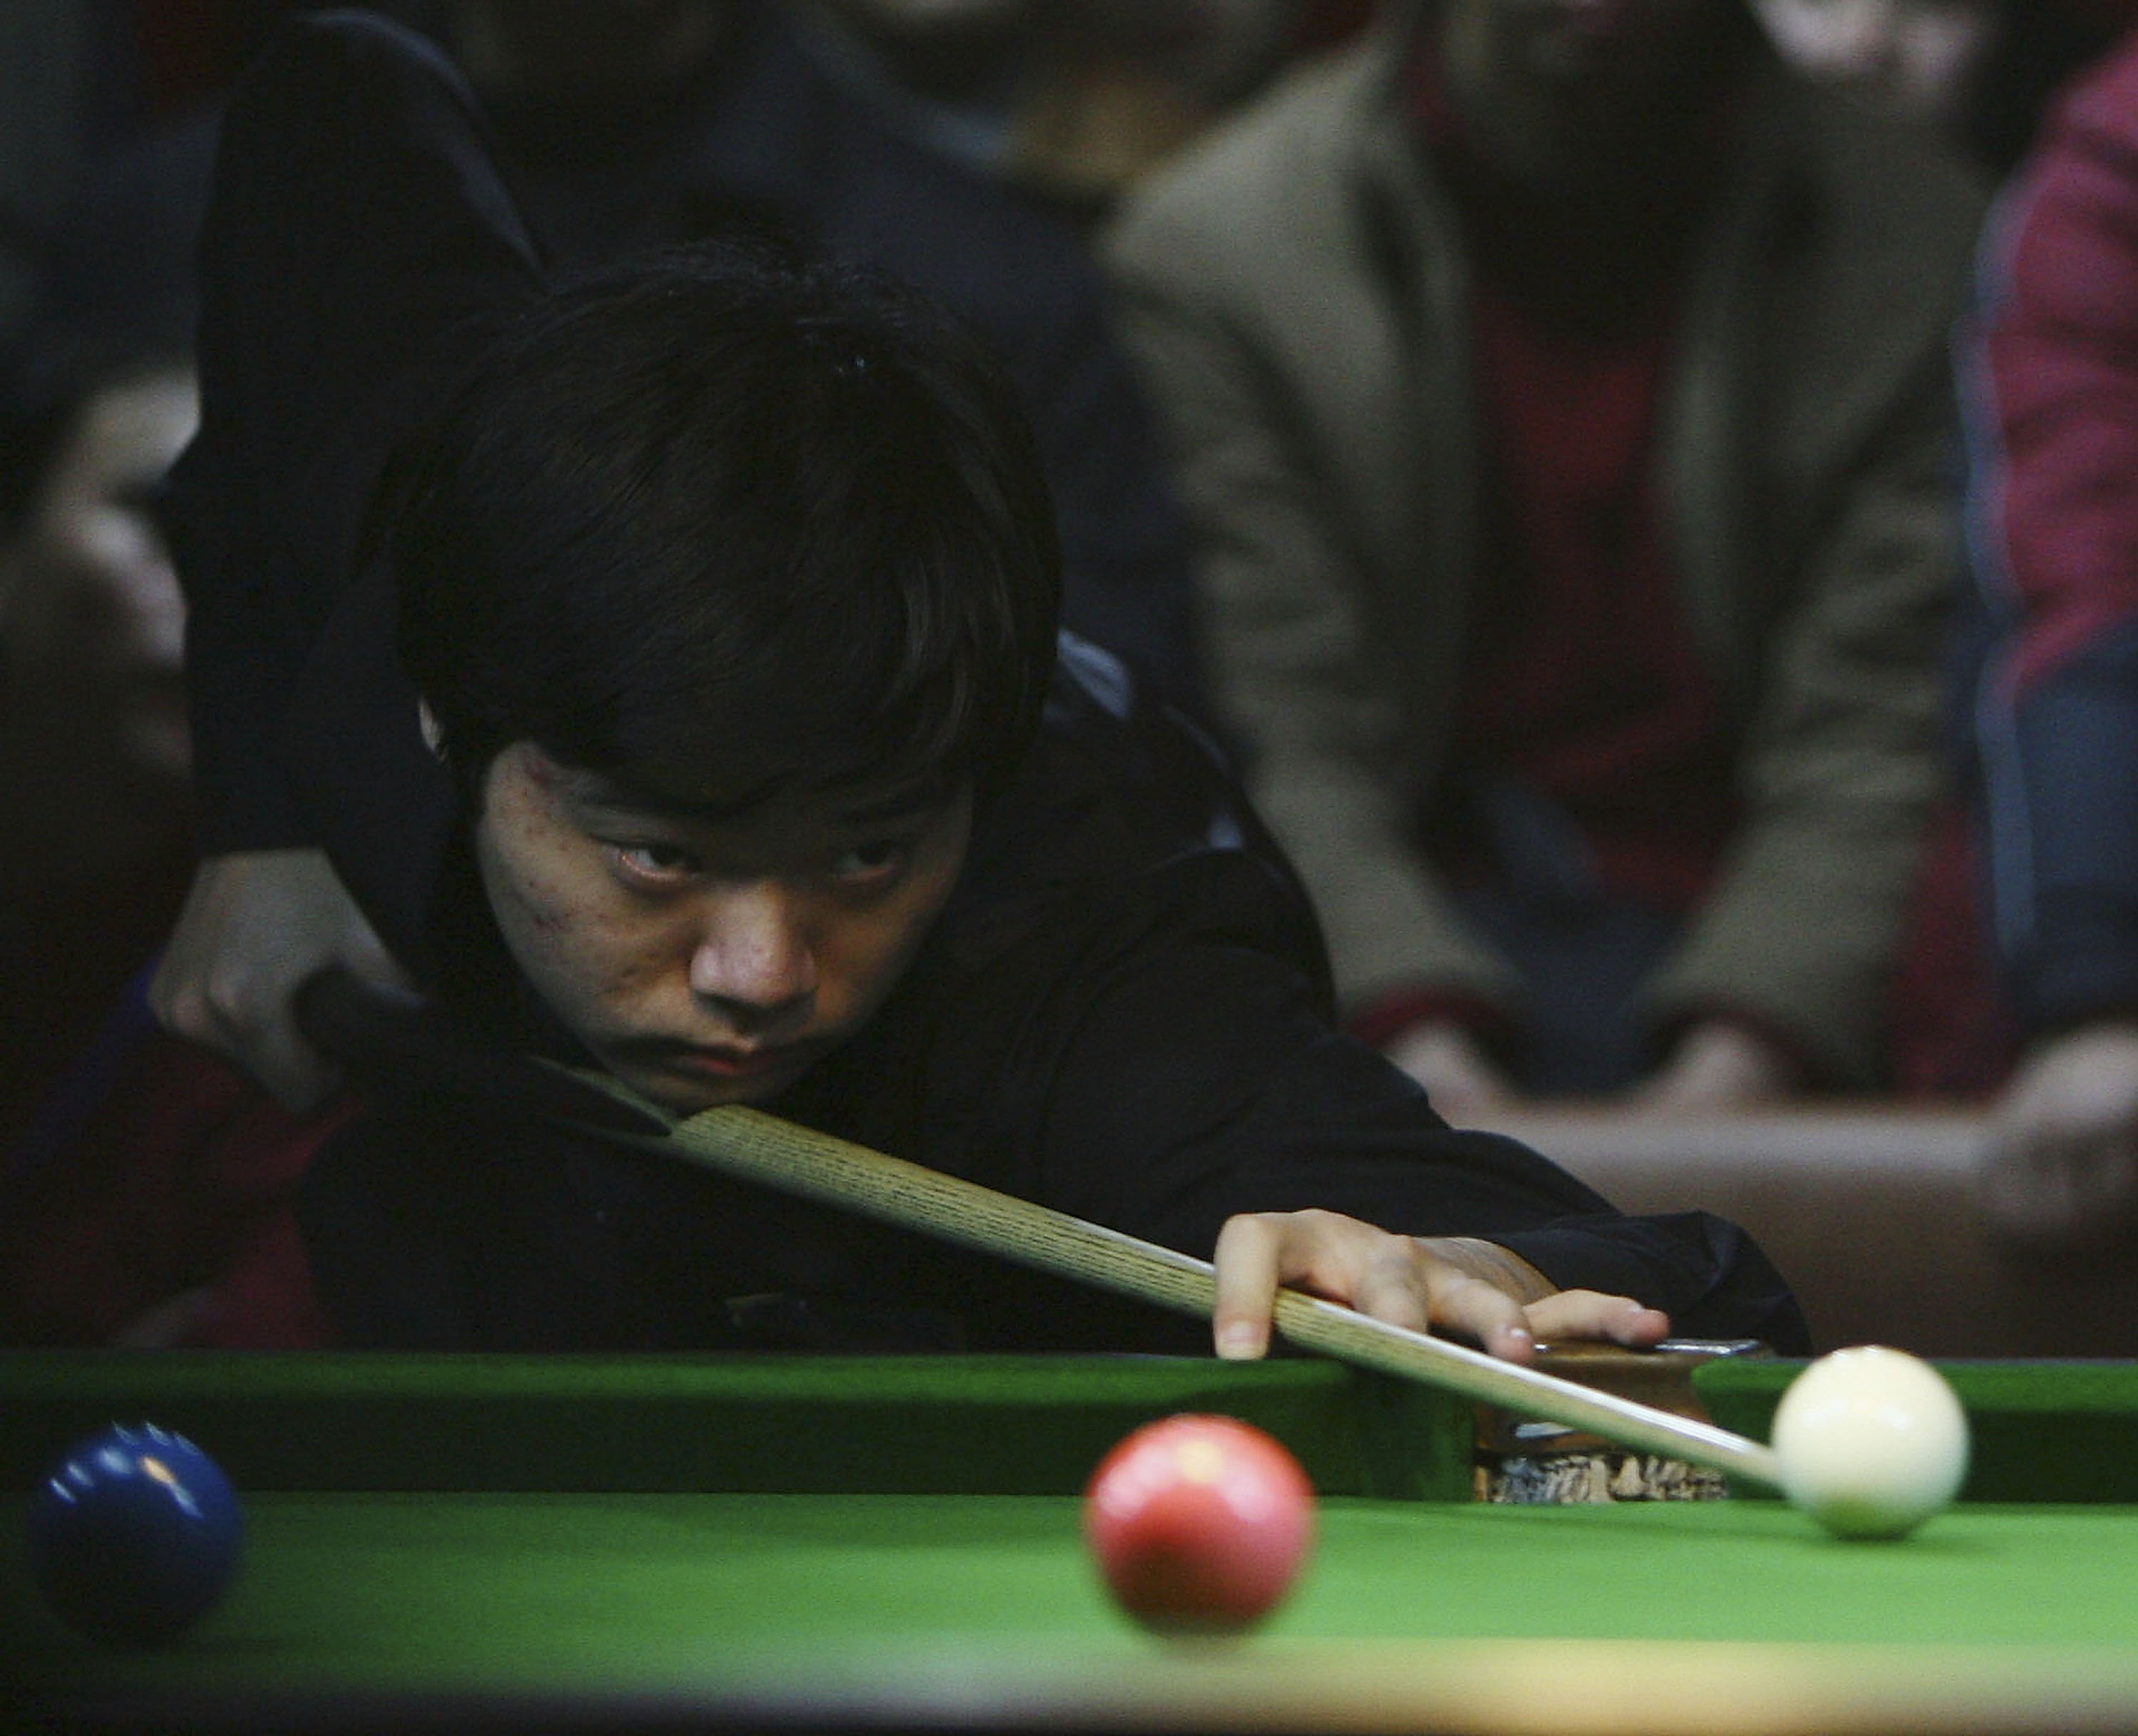 Newly crowned British champion Ding Junhui of China plays a shot during the 2005 China National Professional Snooker Qualifying Tournament in Nanjing, Jiangsu province, China on December 22, 2005. (China Photos/Getty Images)